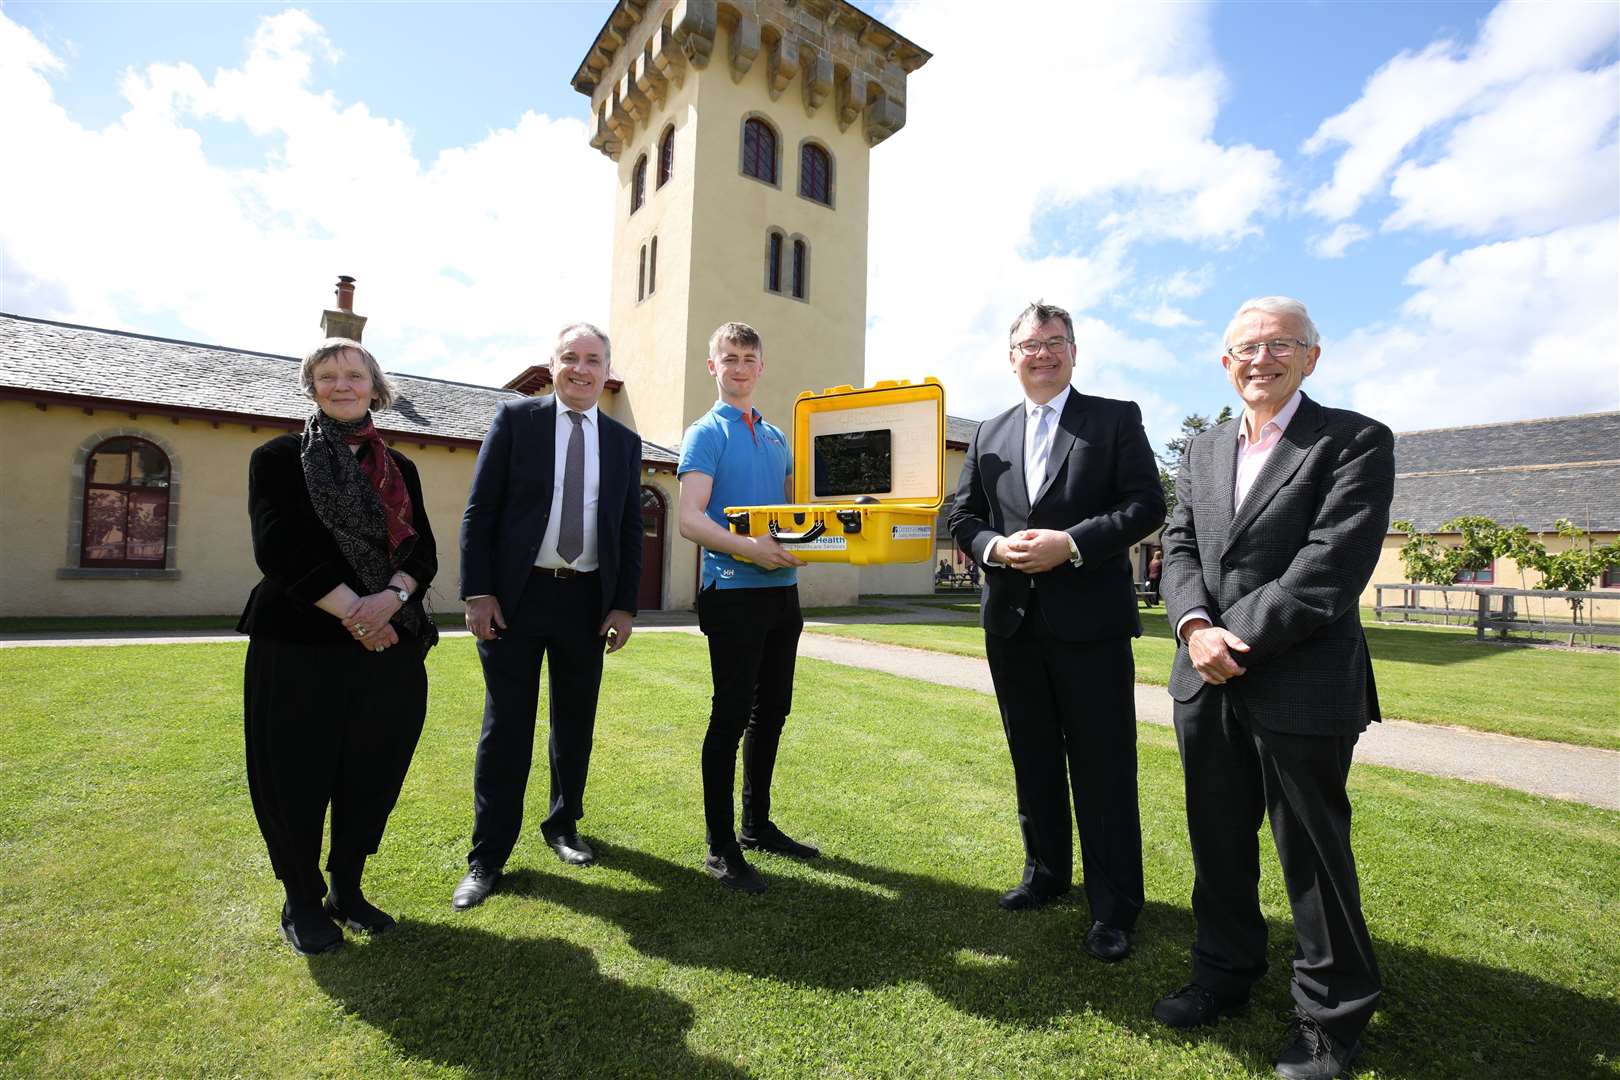 The centre is launched by (from left) Professor Irene McAra-McWilliam, Richard Lochhead MSP, Reece Moyes from CorporateHealth International UK Ltd, Scotland Office Minister Iain Stewart and chief executive of the Digital Health and Innovation Centre...Picture: Paul Campbell